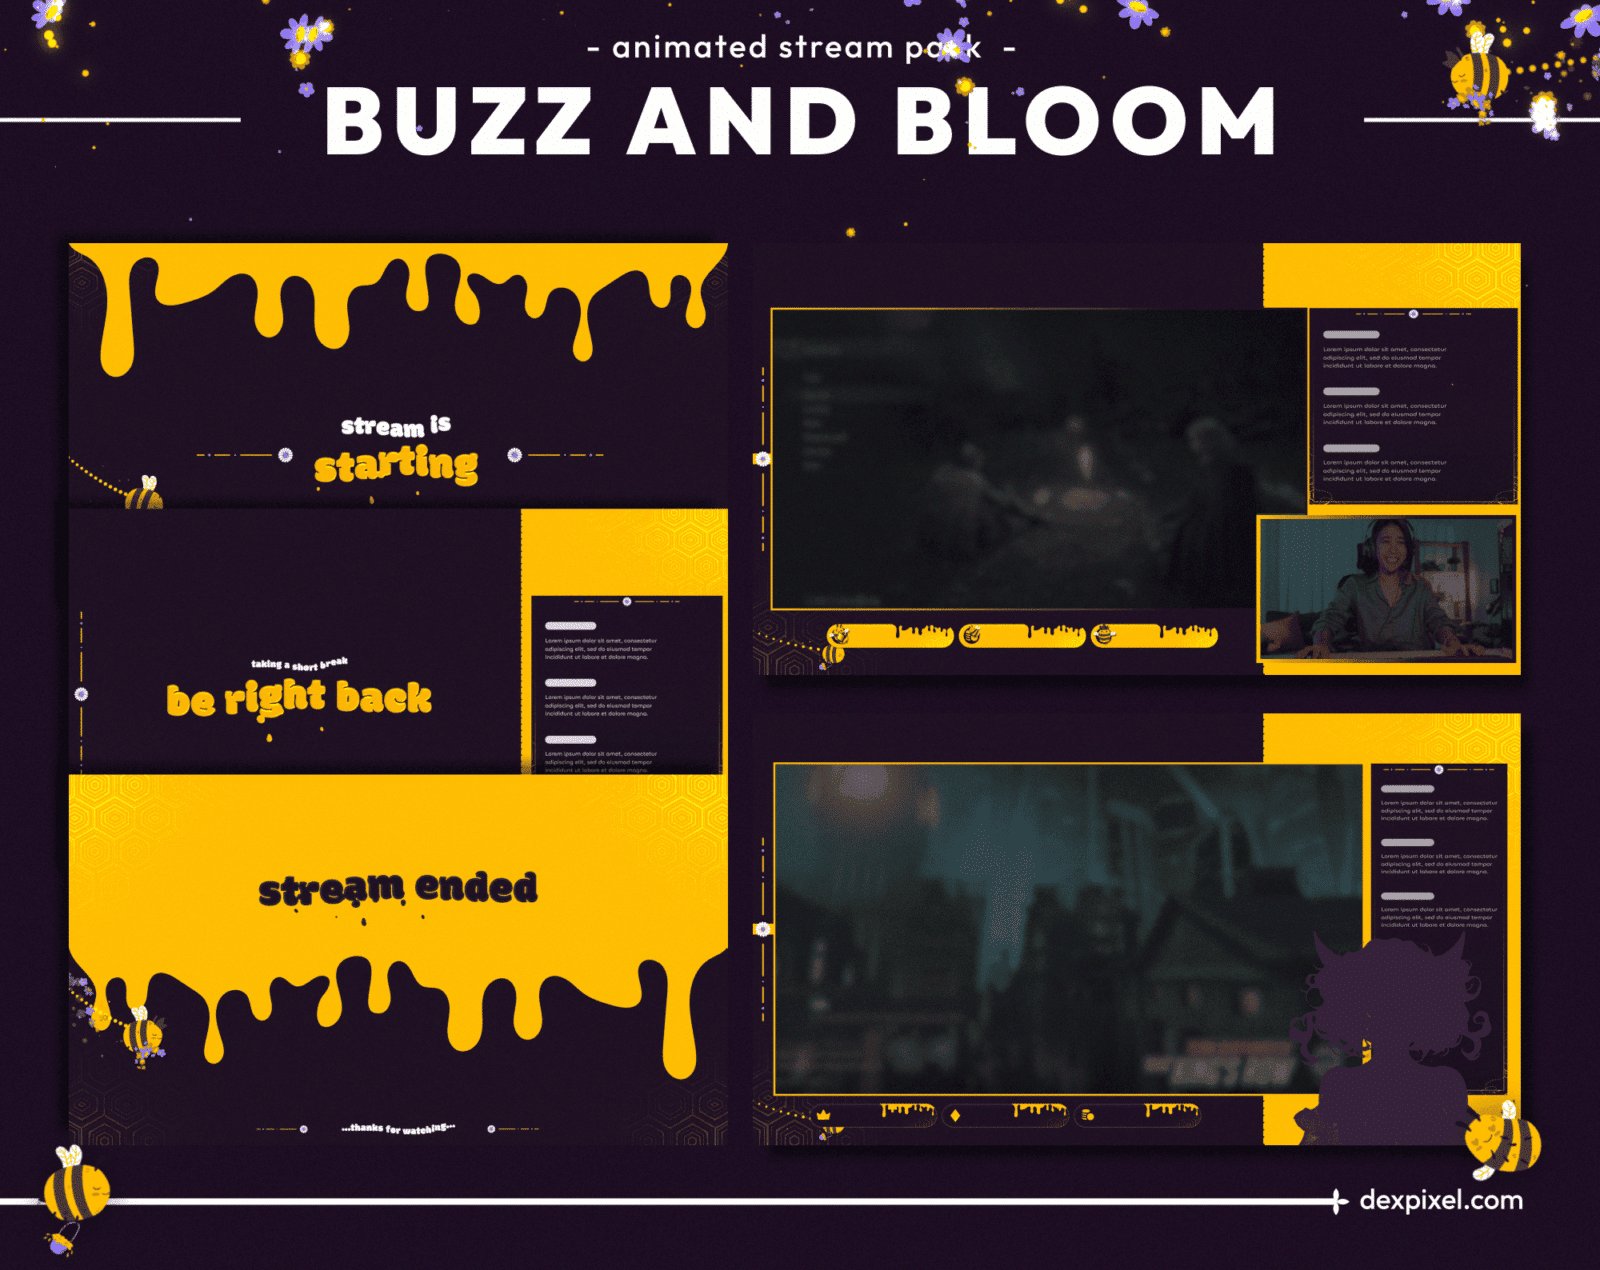 Buzz and Bloom Animated Stream Pack Scenes